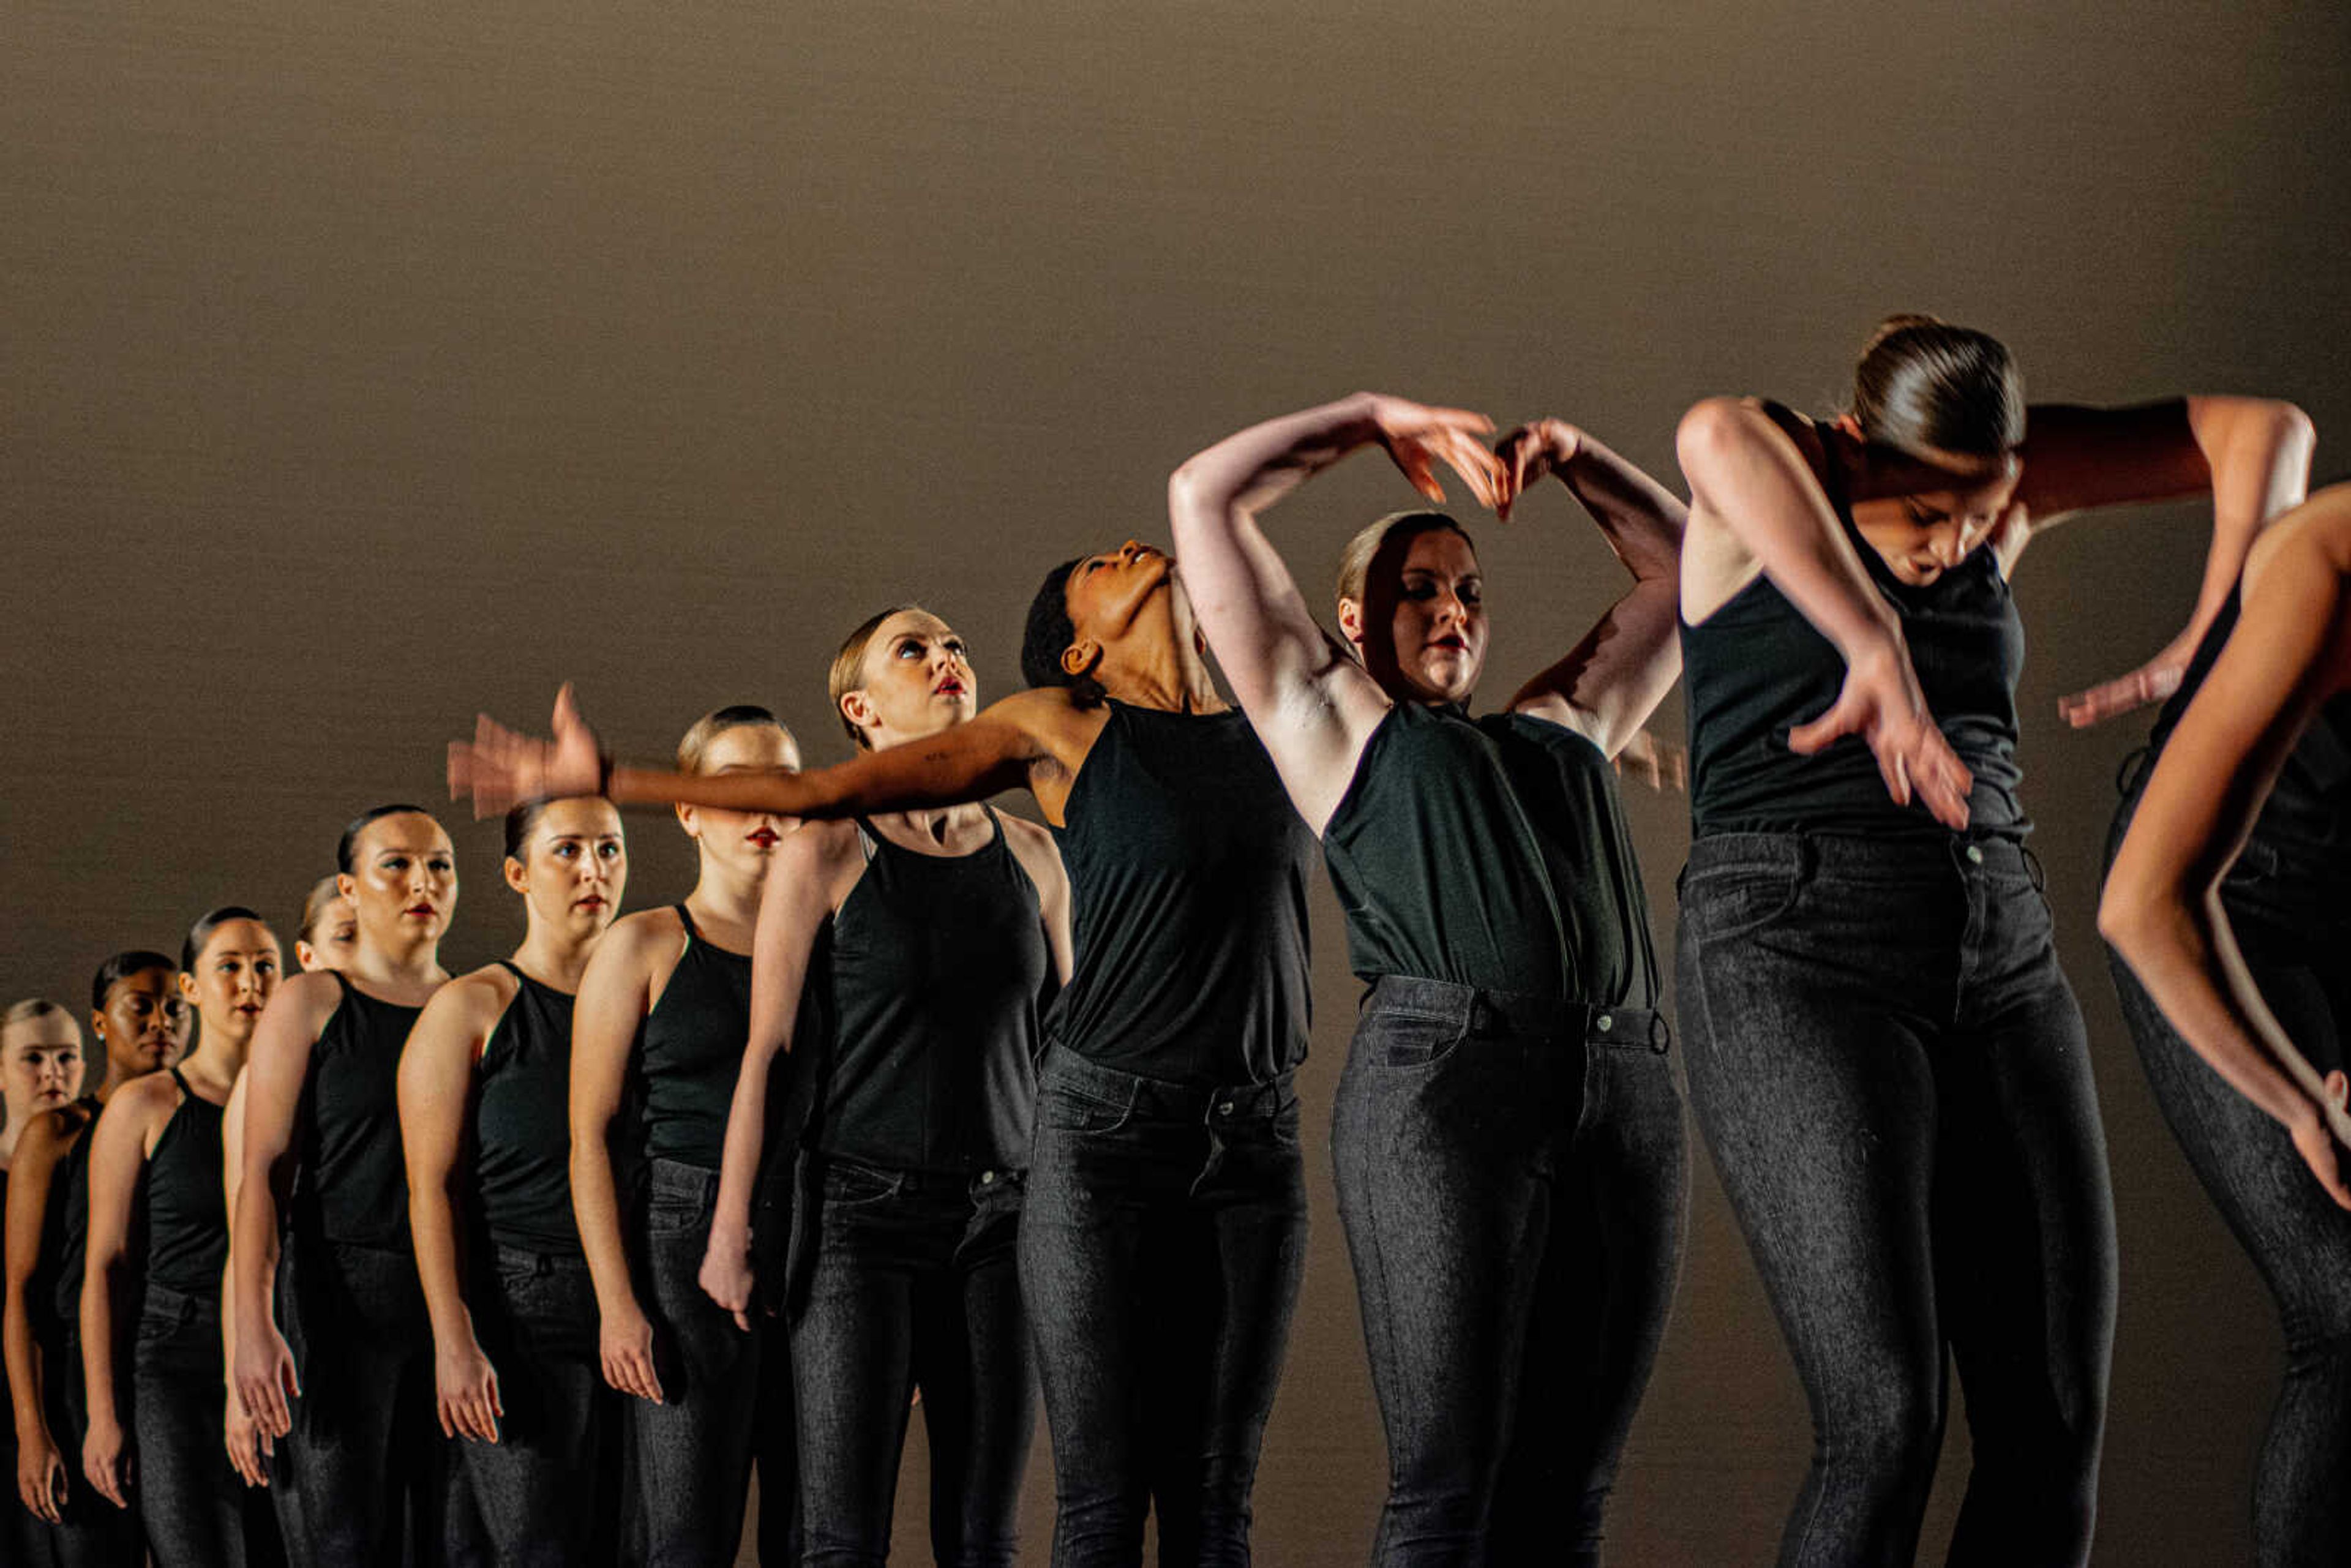 Dancers performing a wave-like sequence on Nov. 12th 2019 in Bedell Performance Hall, Cape Girardeau.